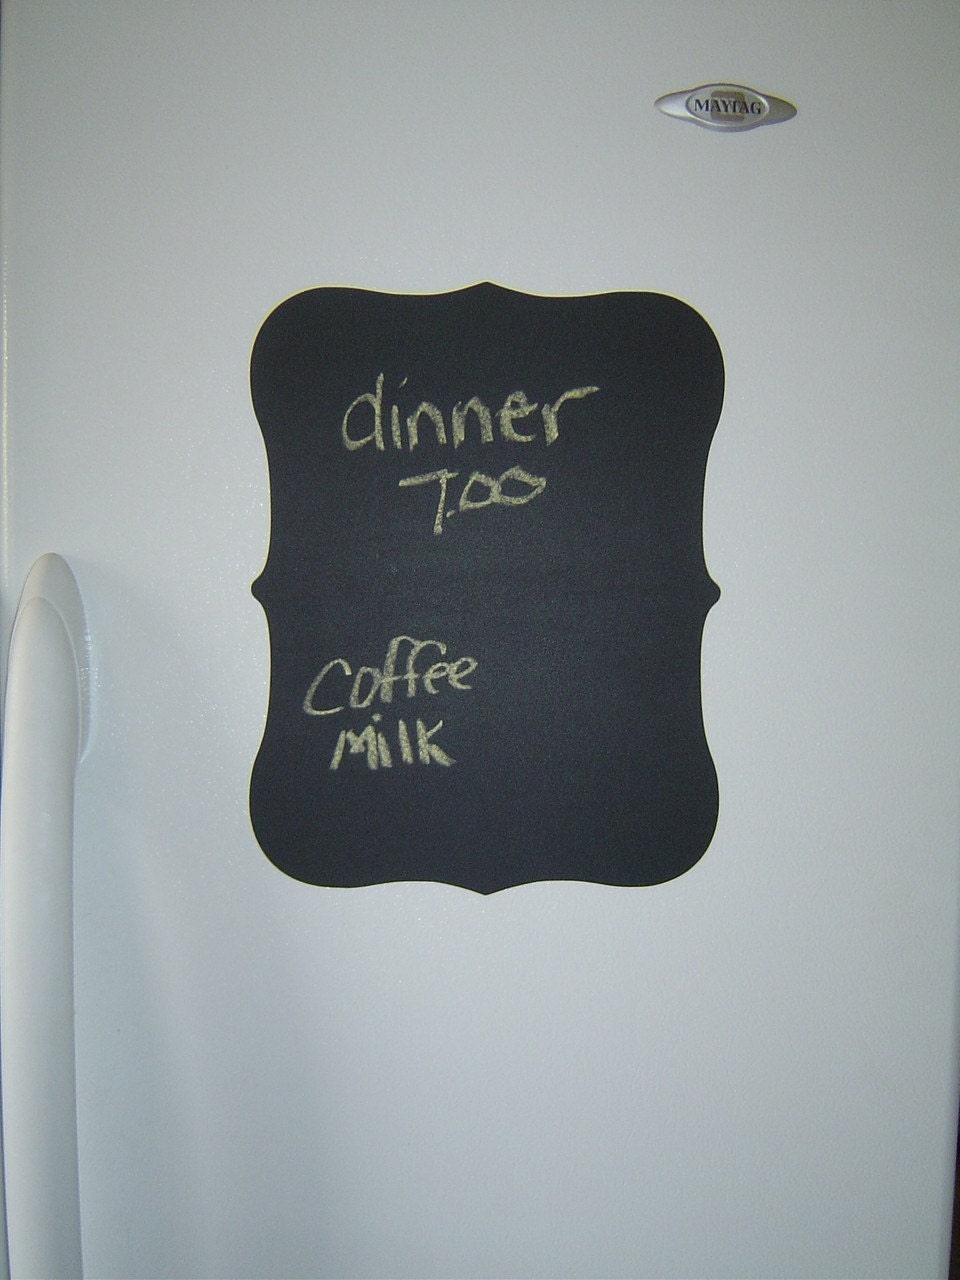 Large Chalkboard Plaque Vinyl Wall Decal